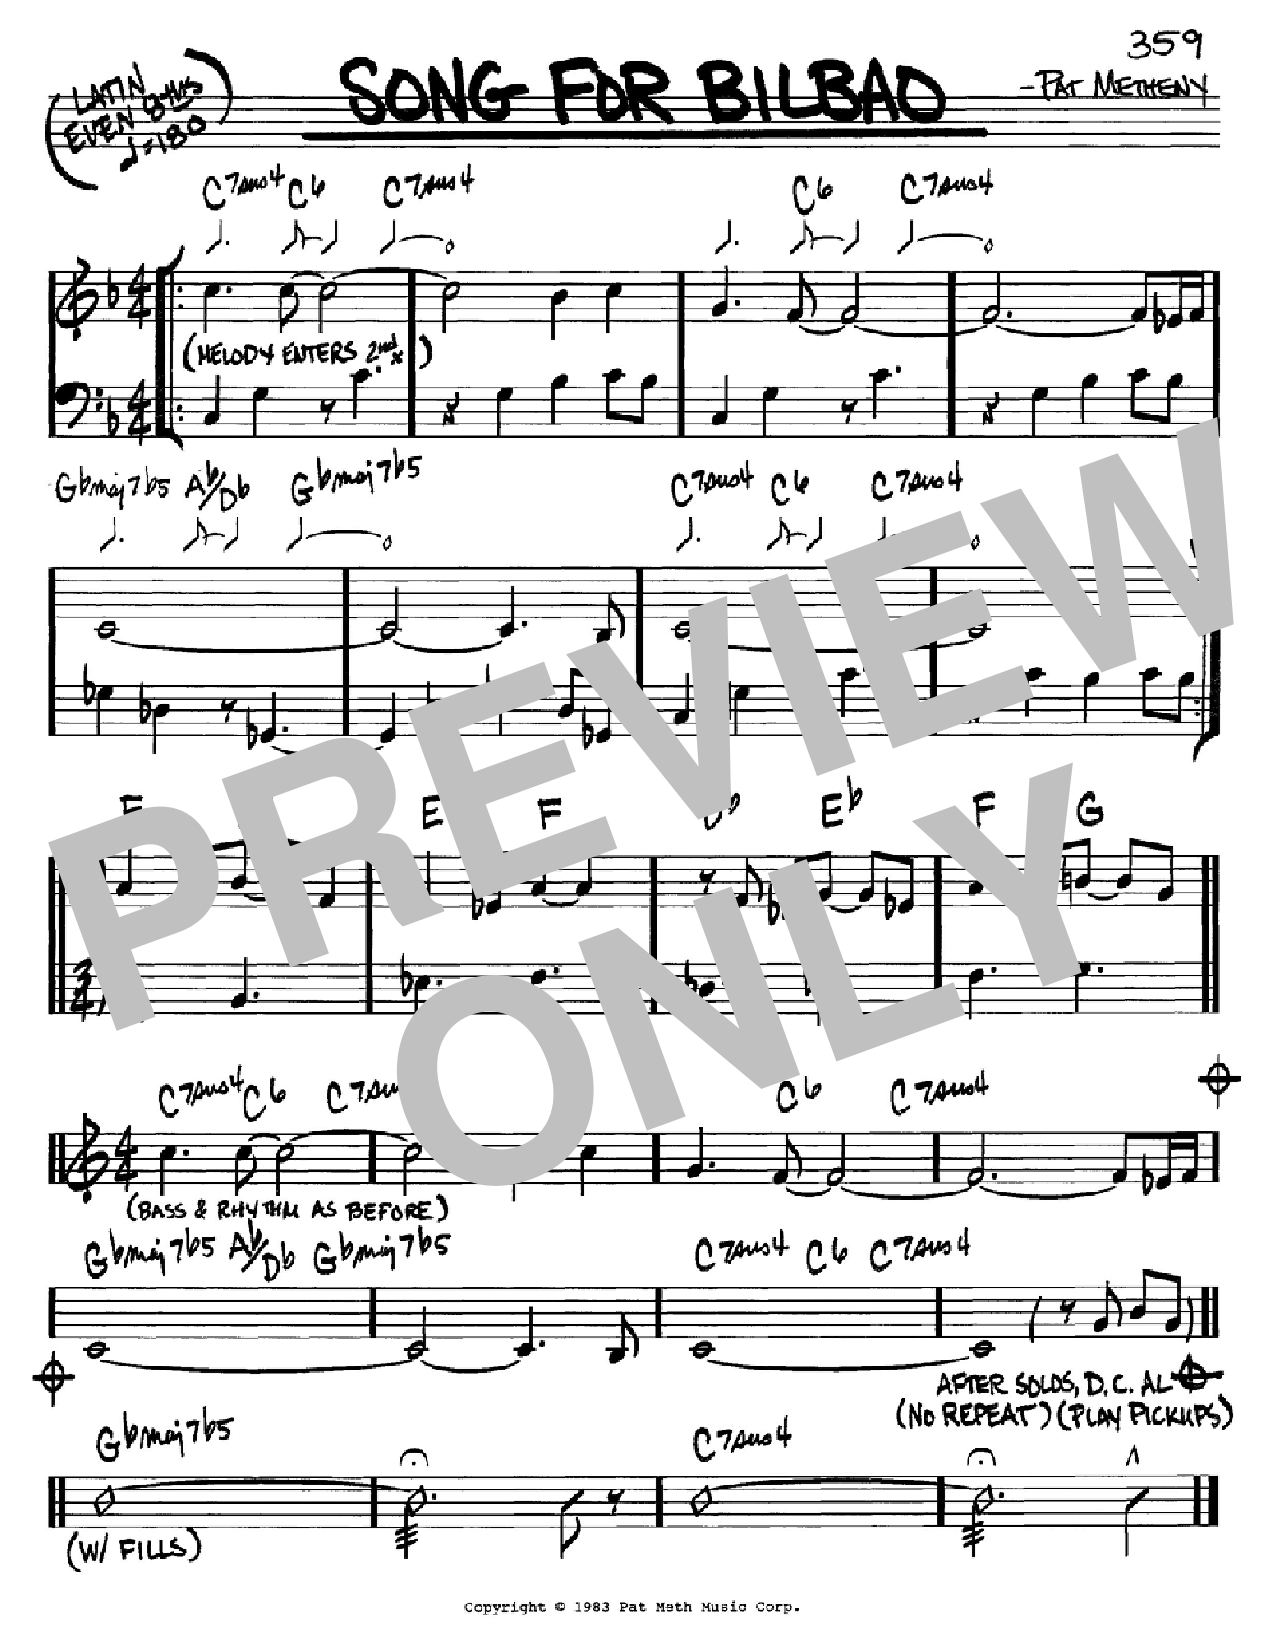 Download Pat Metheny Song For Bilbao Sheet Music